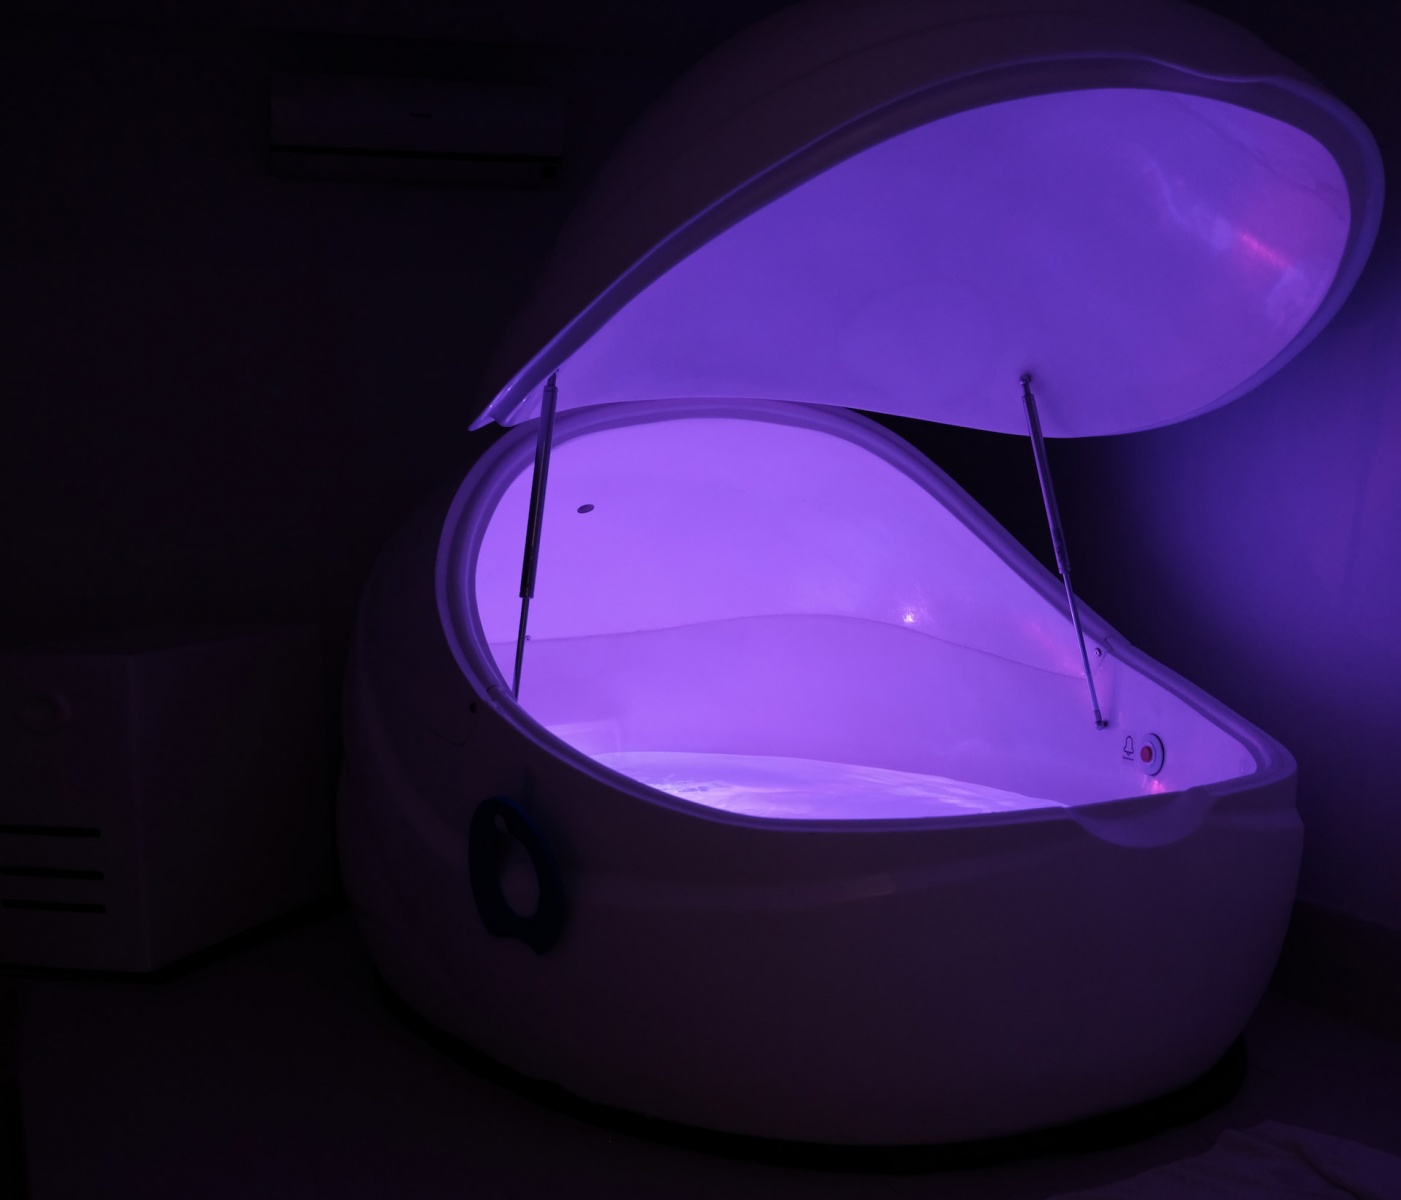 How Does a Sensory Deprivation Tank Work?